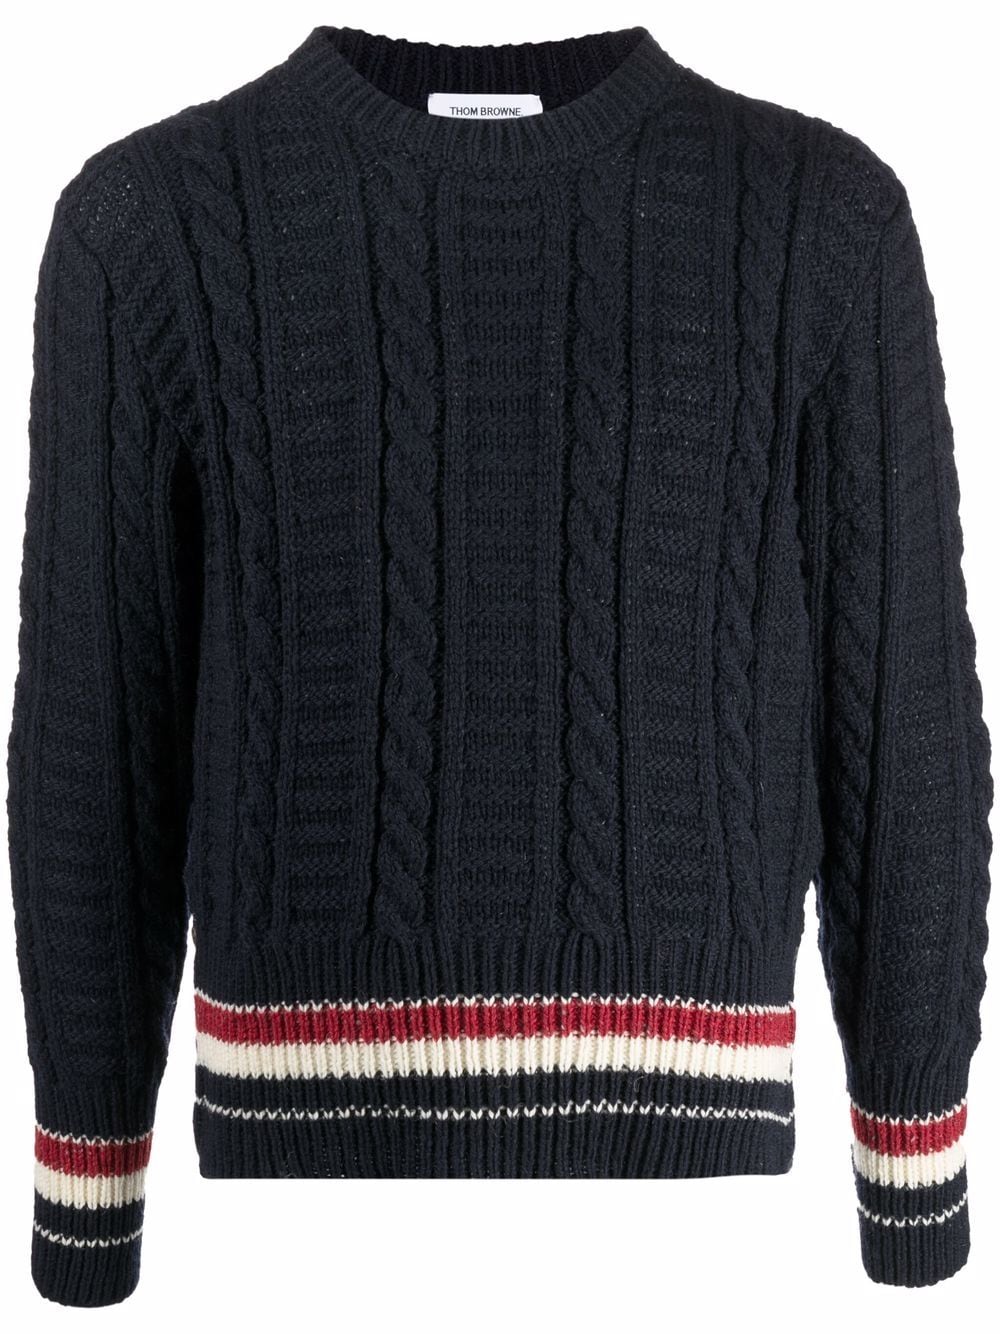 THOM BROWNE CABLE-KNIT LONG-SLEEVE JUMPER